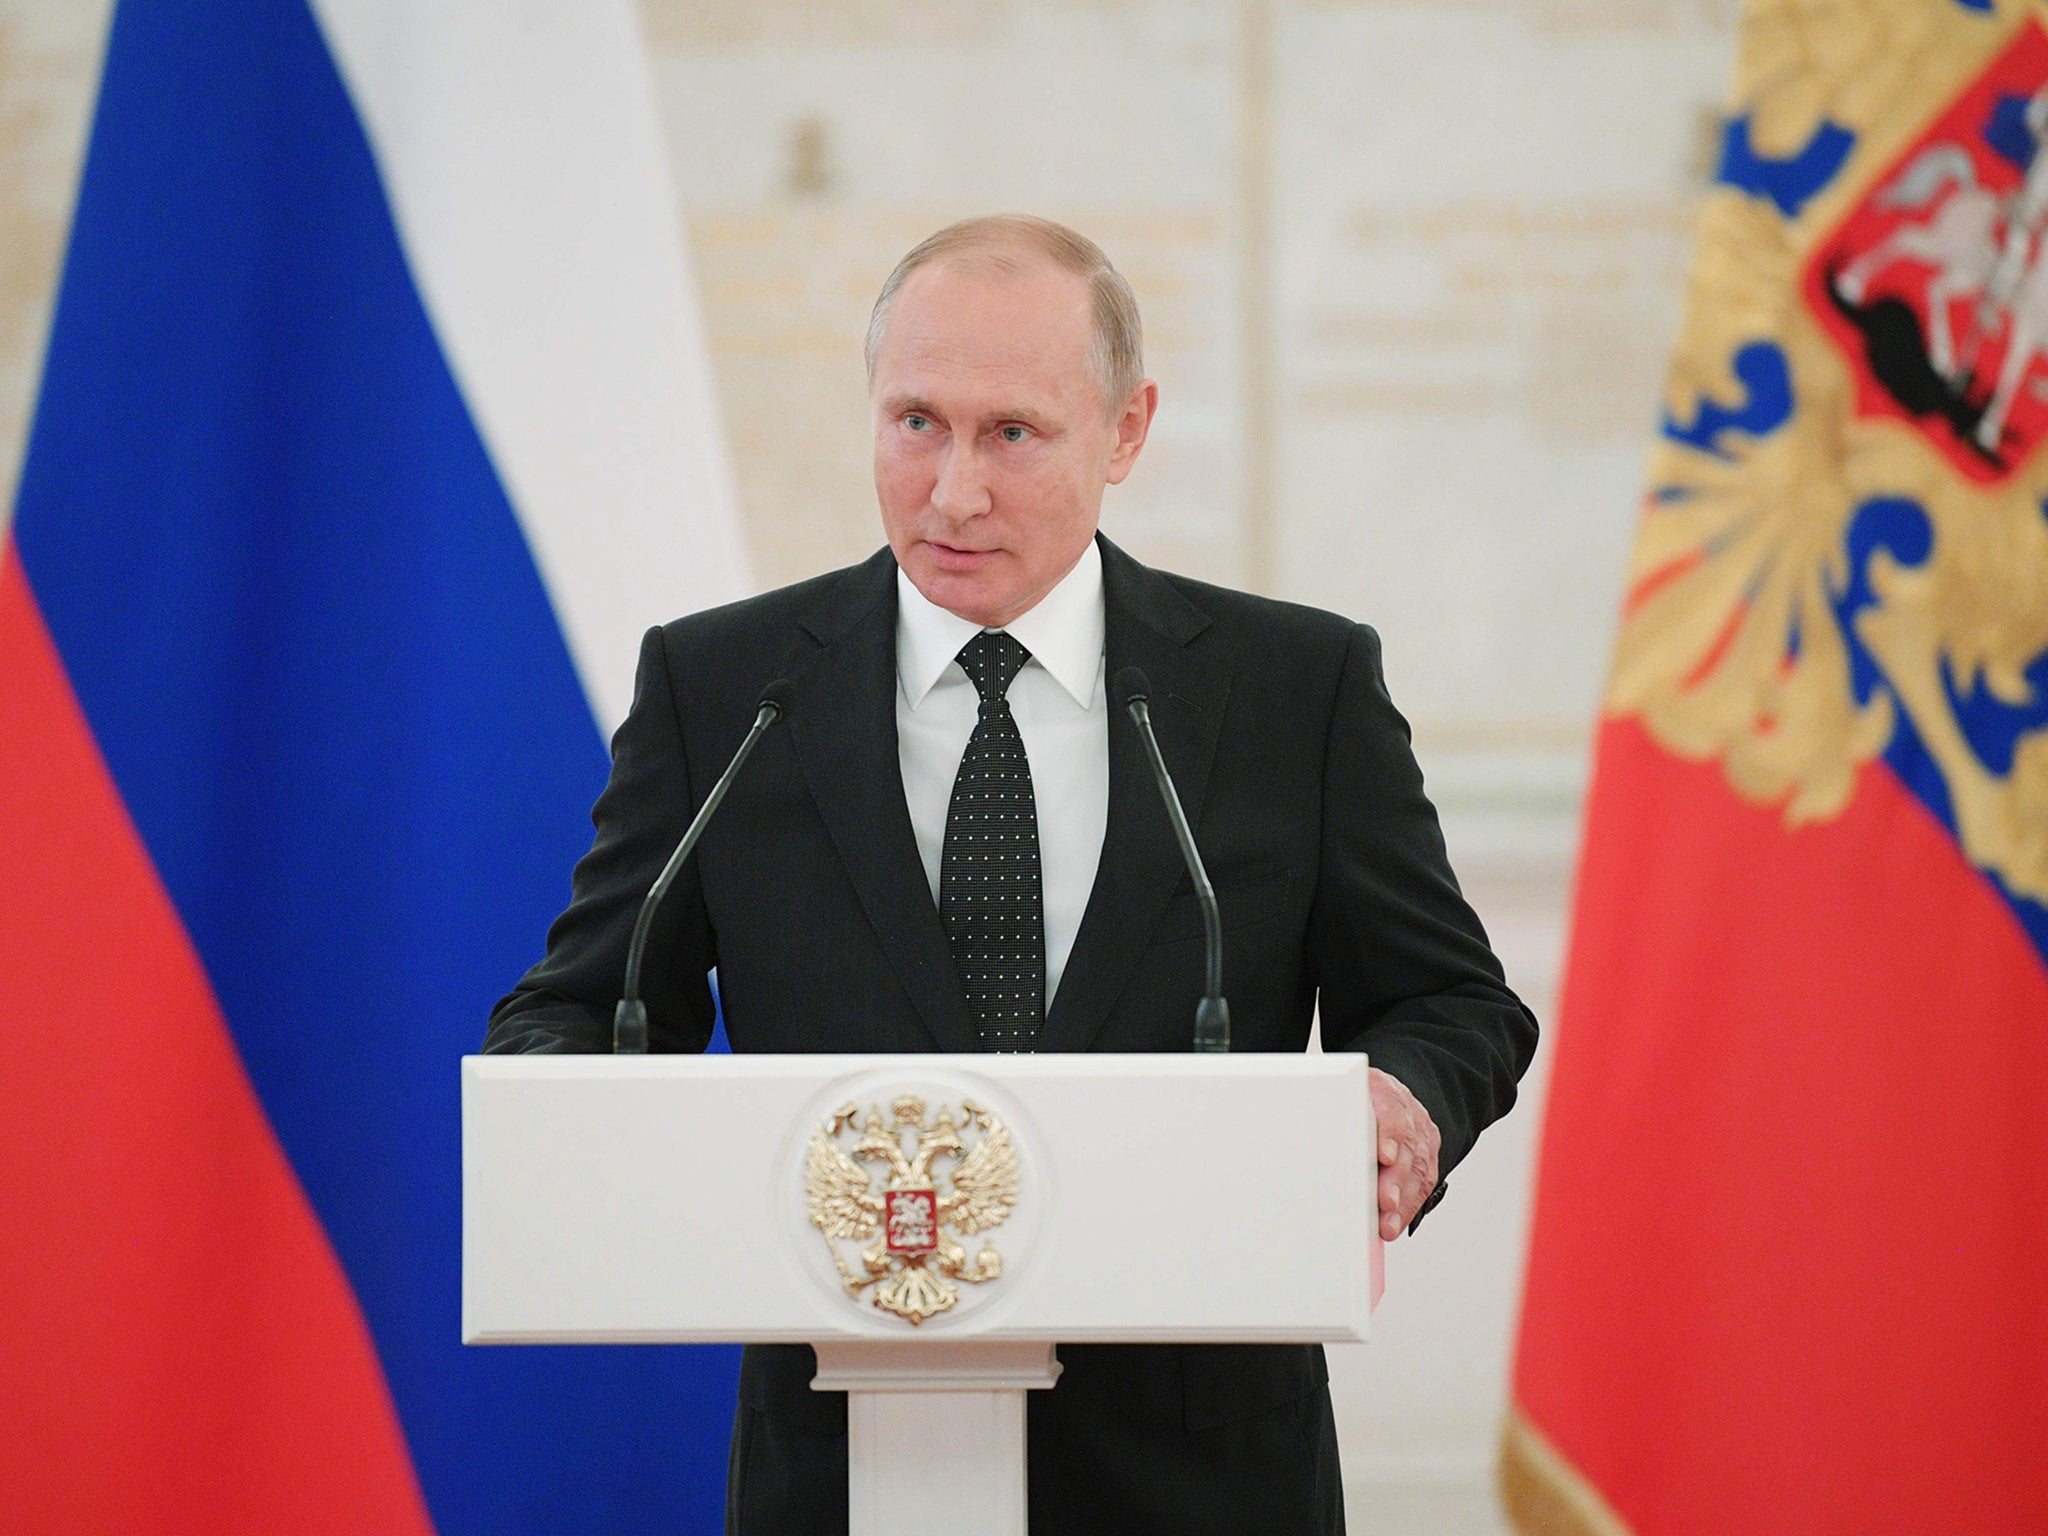 Putin is ready to welcome the world to Russia